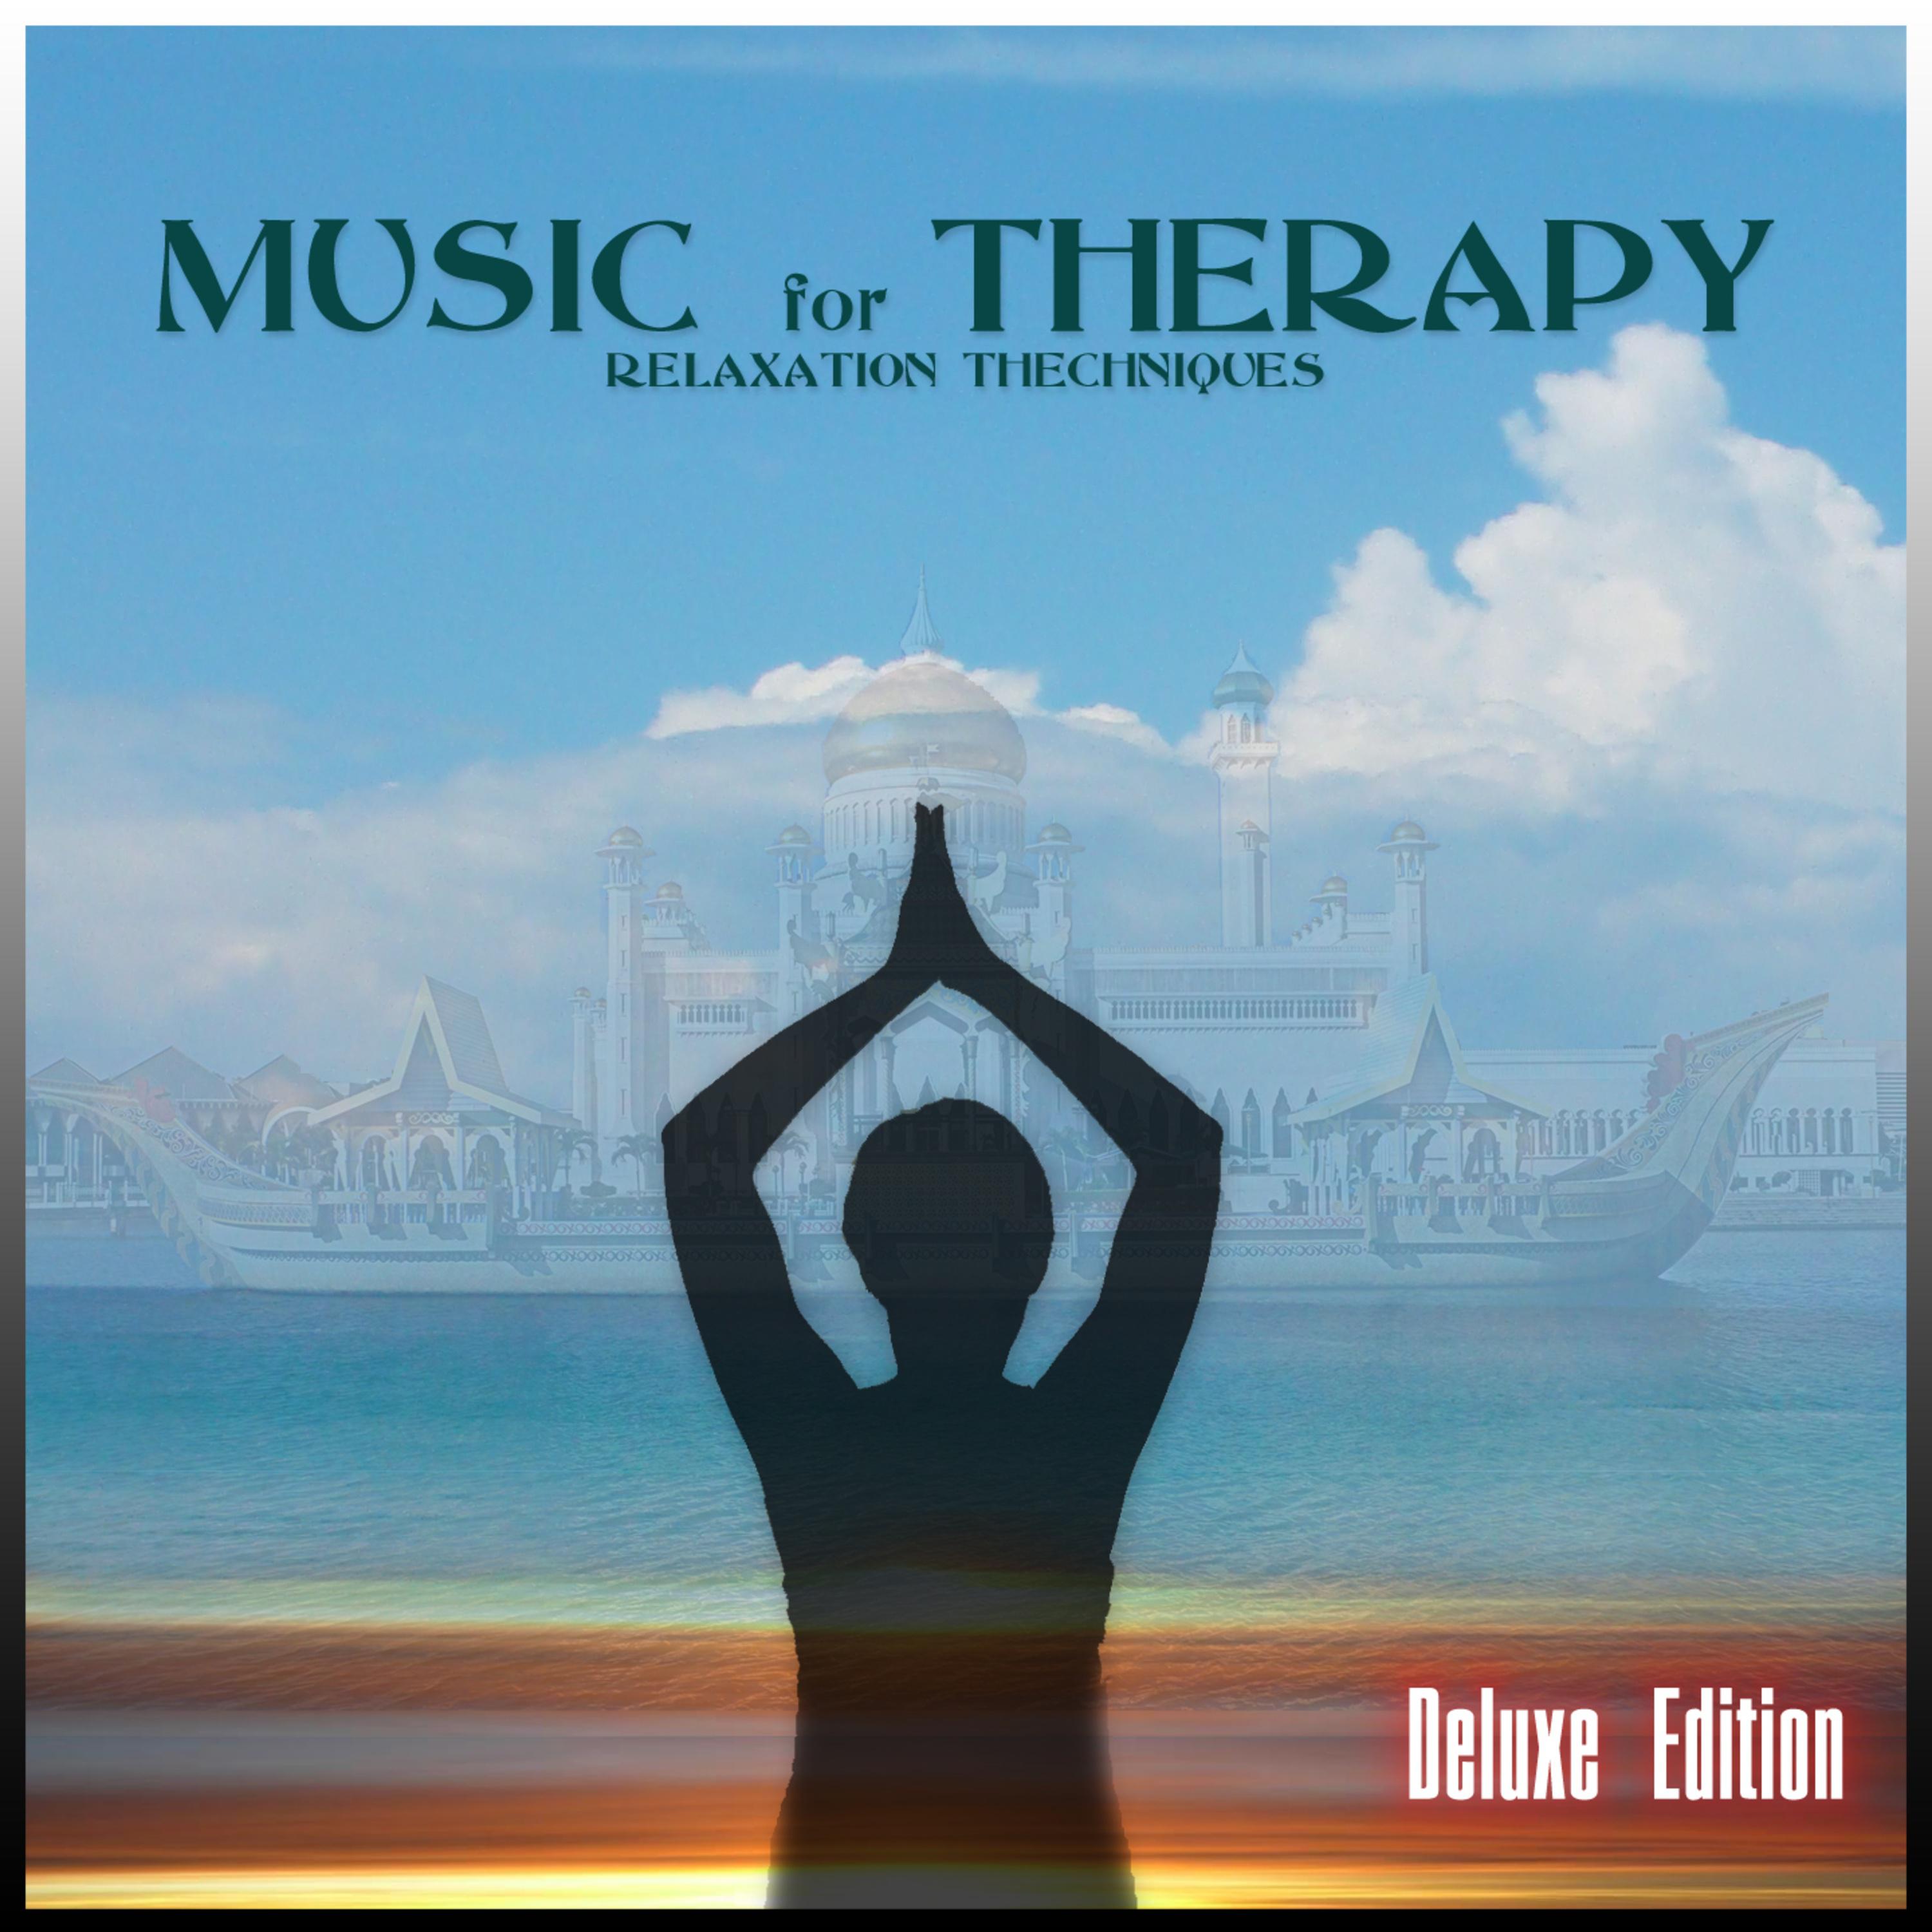 Music for Therapy Relaxation Techniques - Deluxe Edition